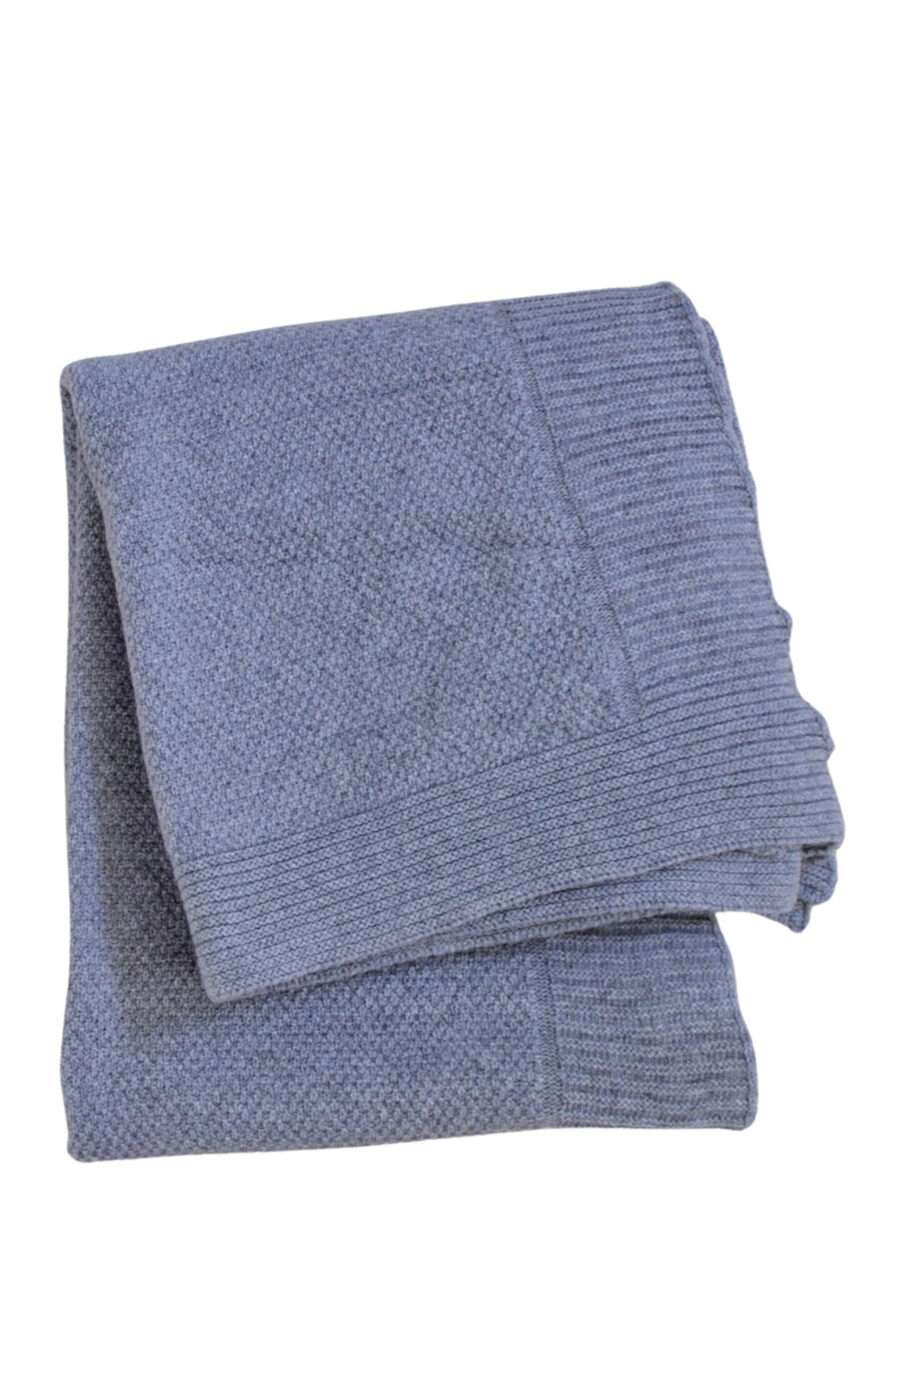 rice light grey knitted woolen throw large